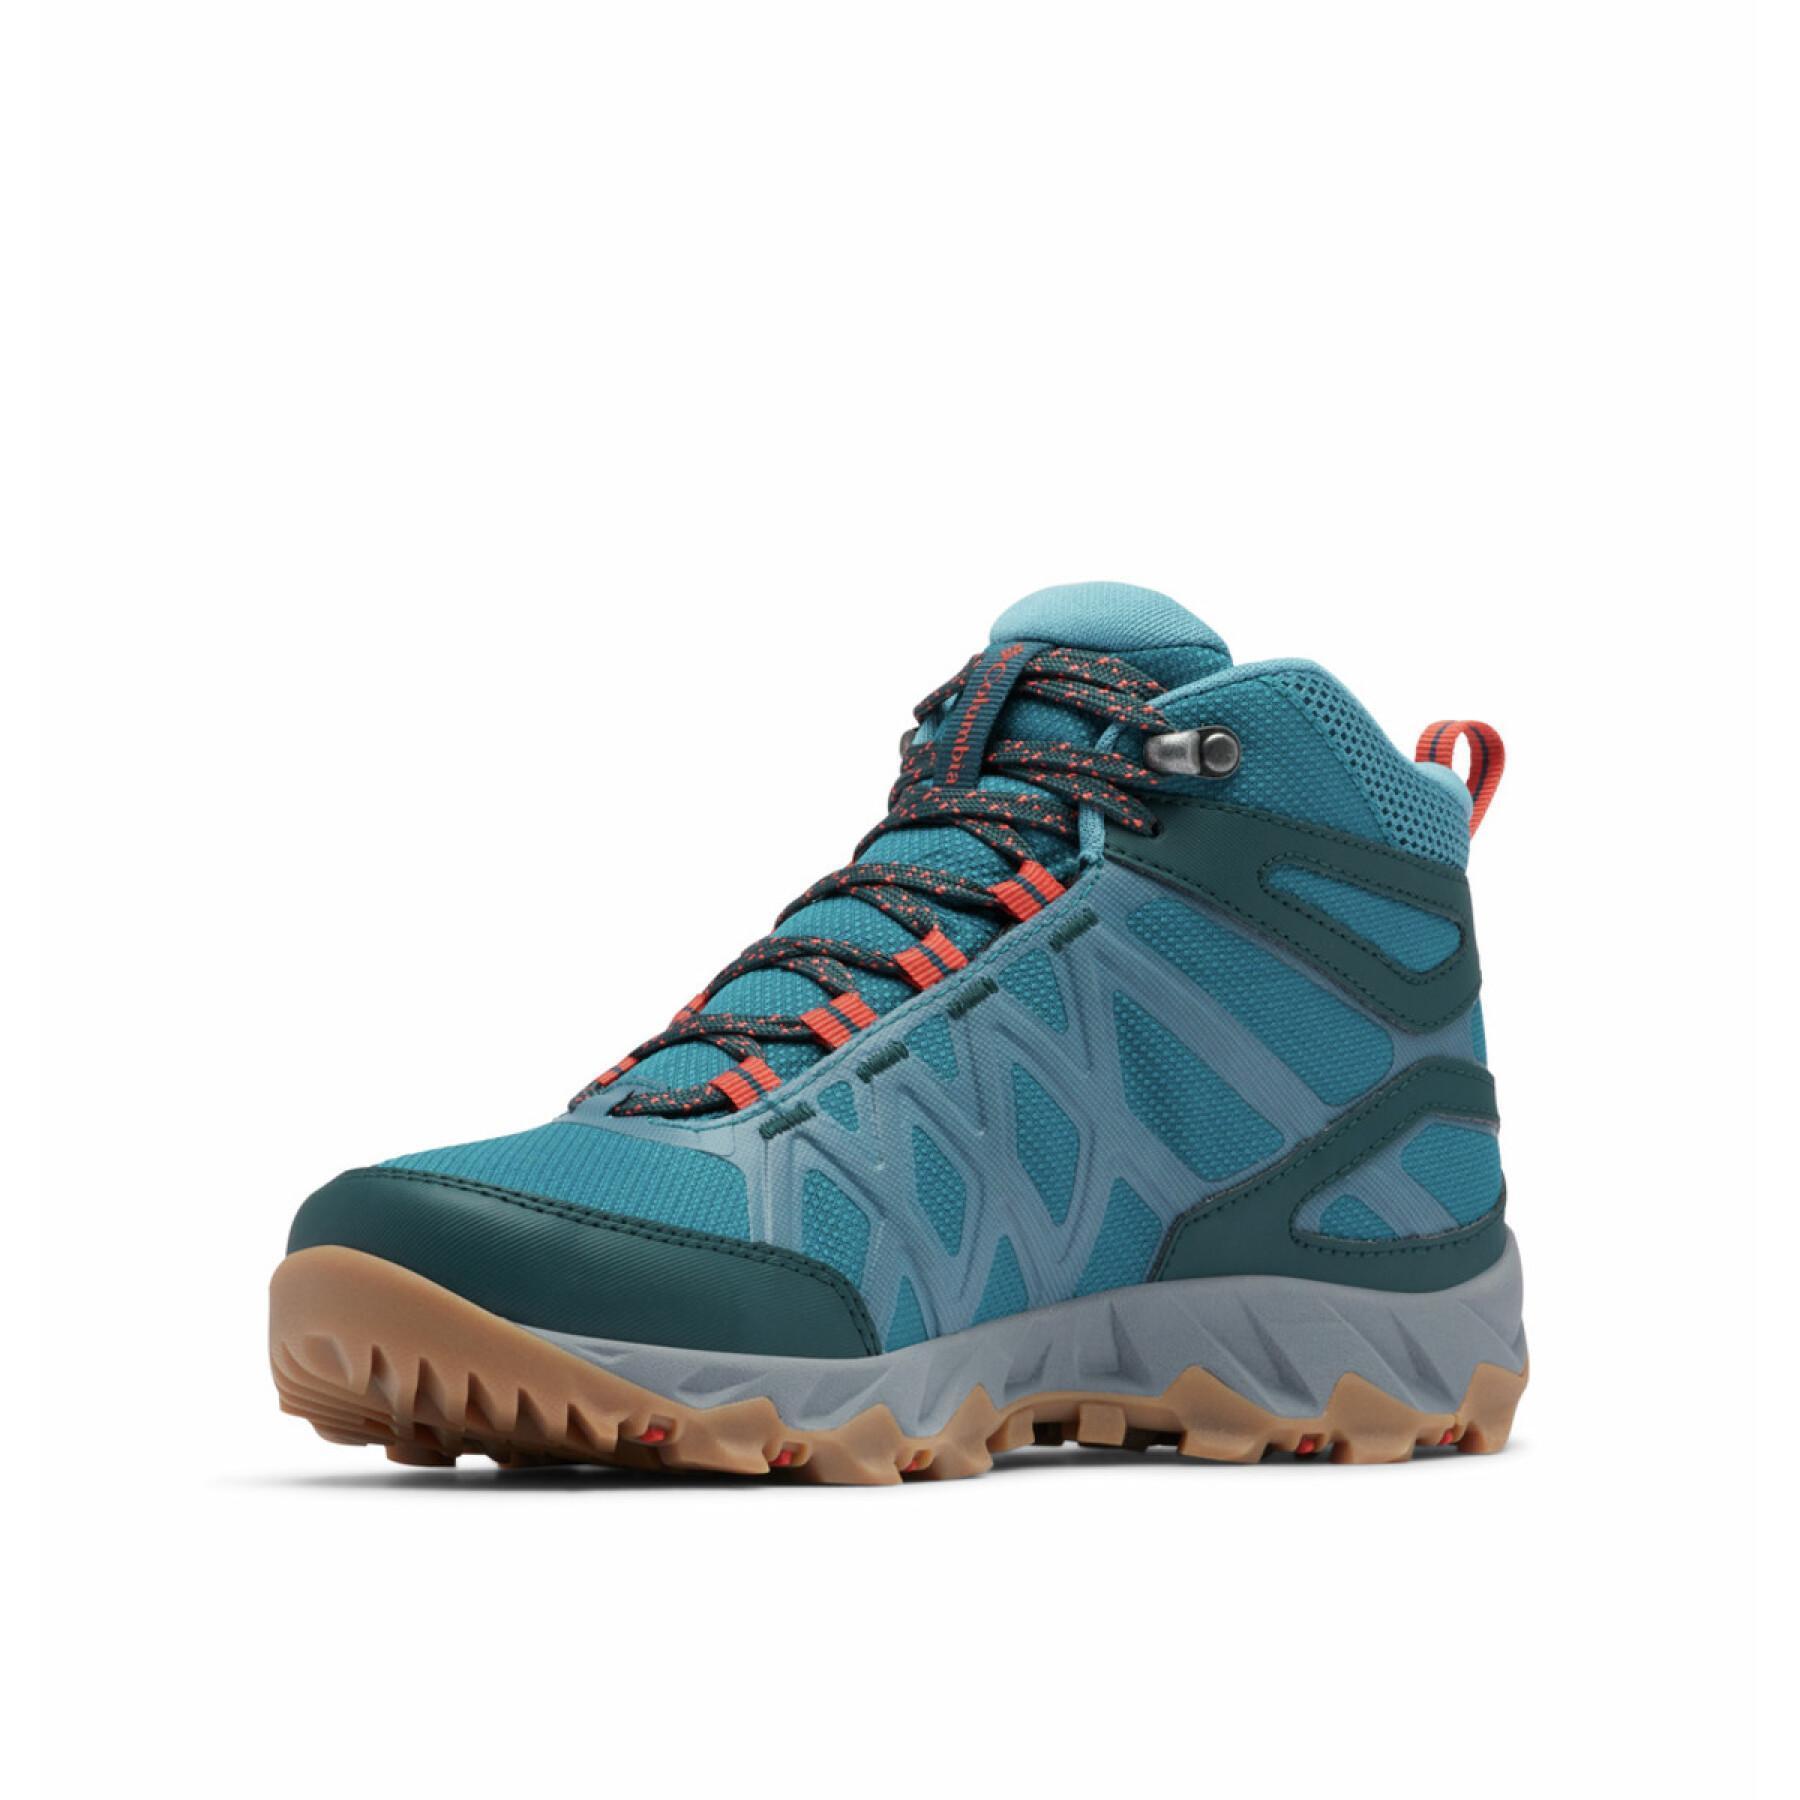 Chaussures femme Columbia PEAKFREAK X2 MID OUTDRY